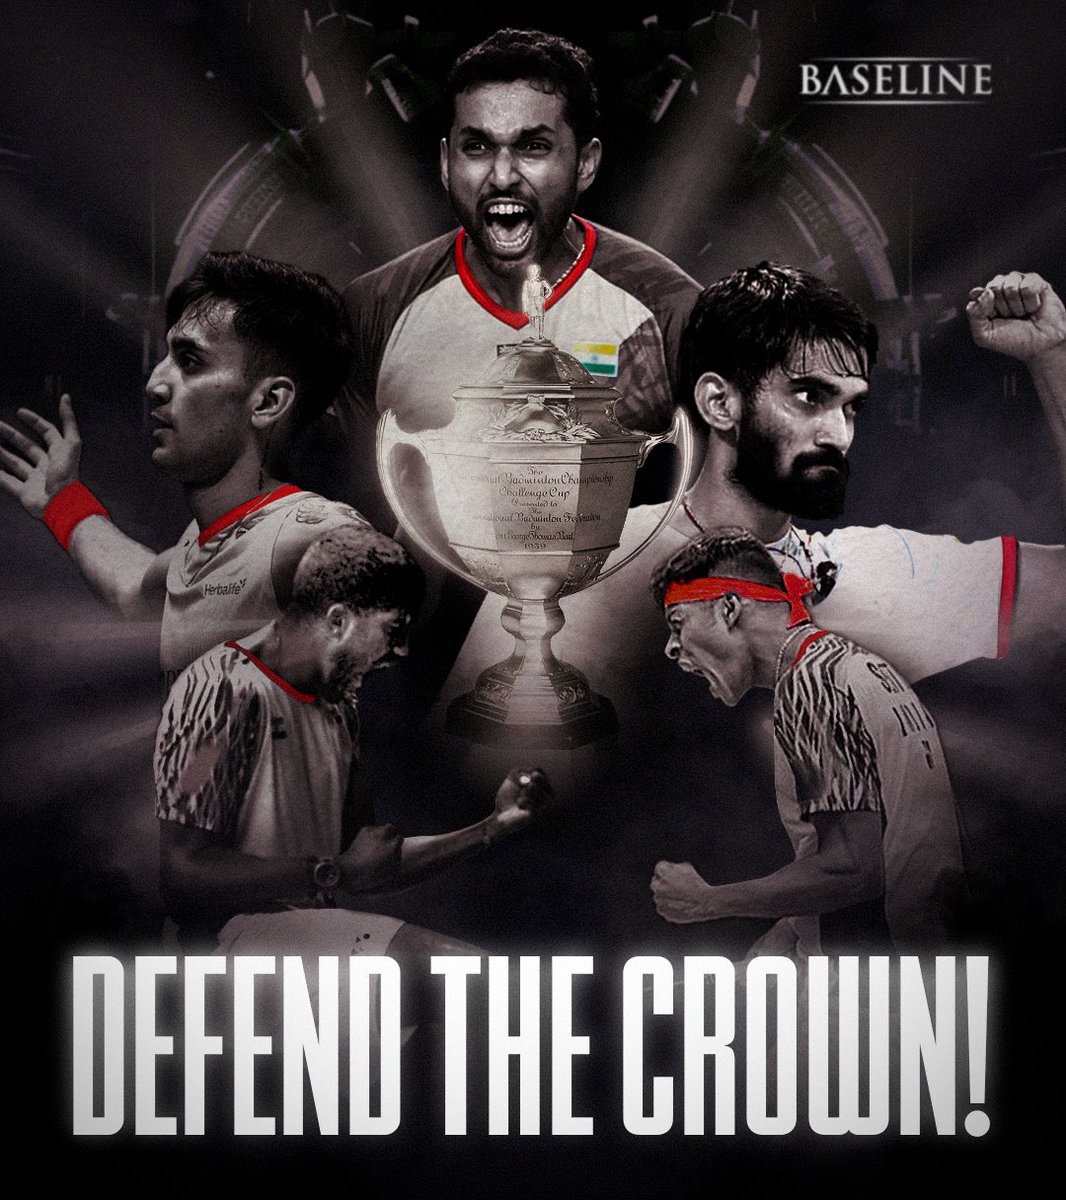 Wishing the Indian Thomas Cup team the very best as they gear up to defend the crown! Let's create another epic chapter in the Thomas Crown Affair! Come on, India 🇮🇳 #TeamBaseline #Badminton